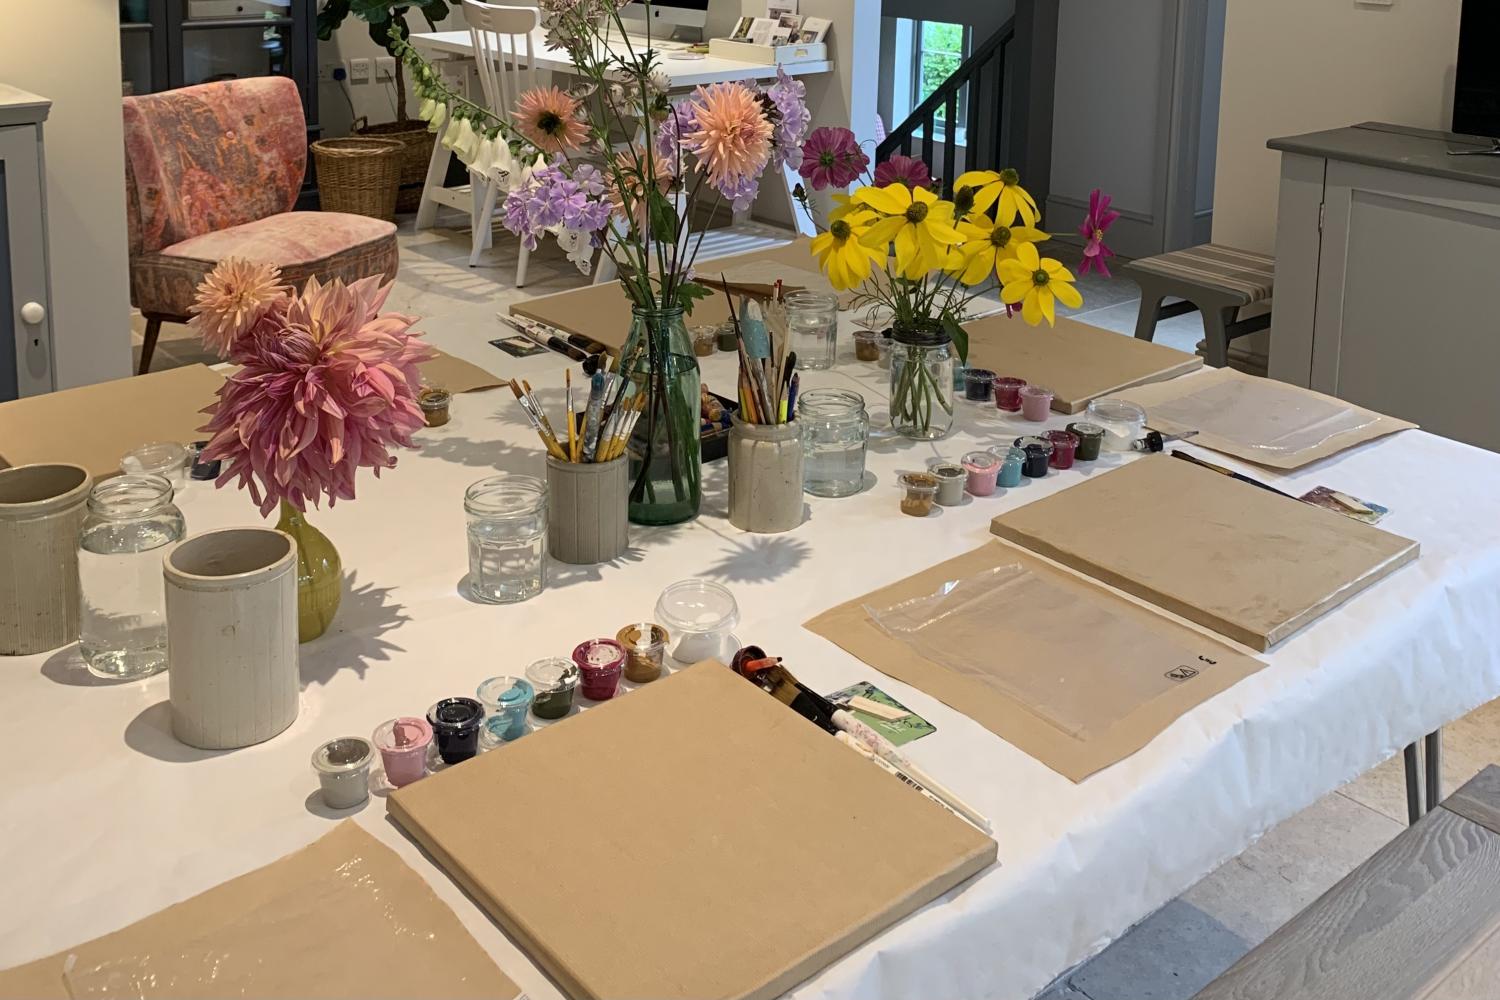 A table laid for an art class with paints, canvases and fresh flowers